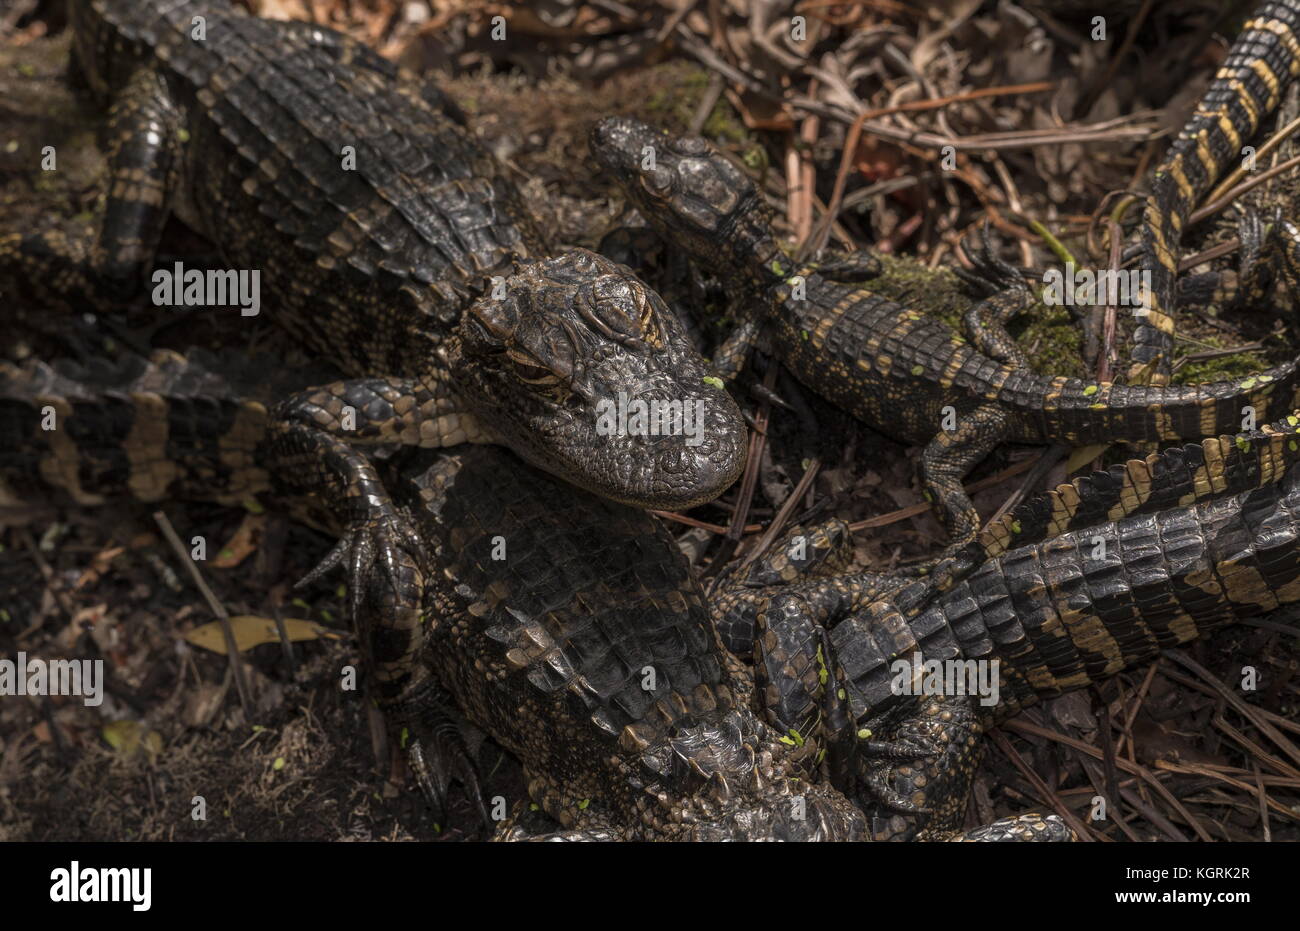 Young American alligators, Alligator mississippiensis, clustered together in 'nursery'. Florida. Stock Photo